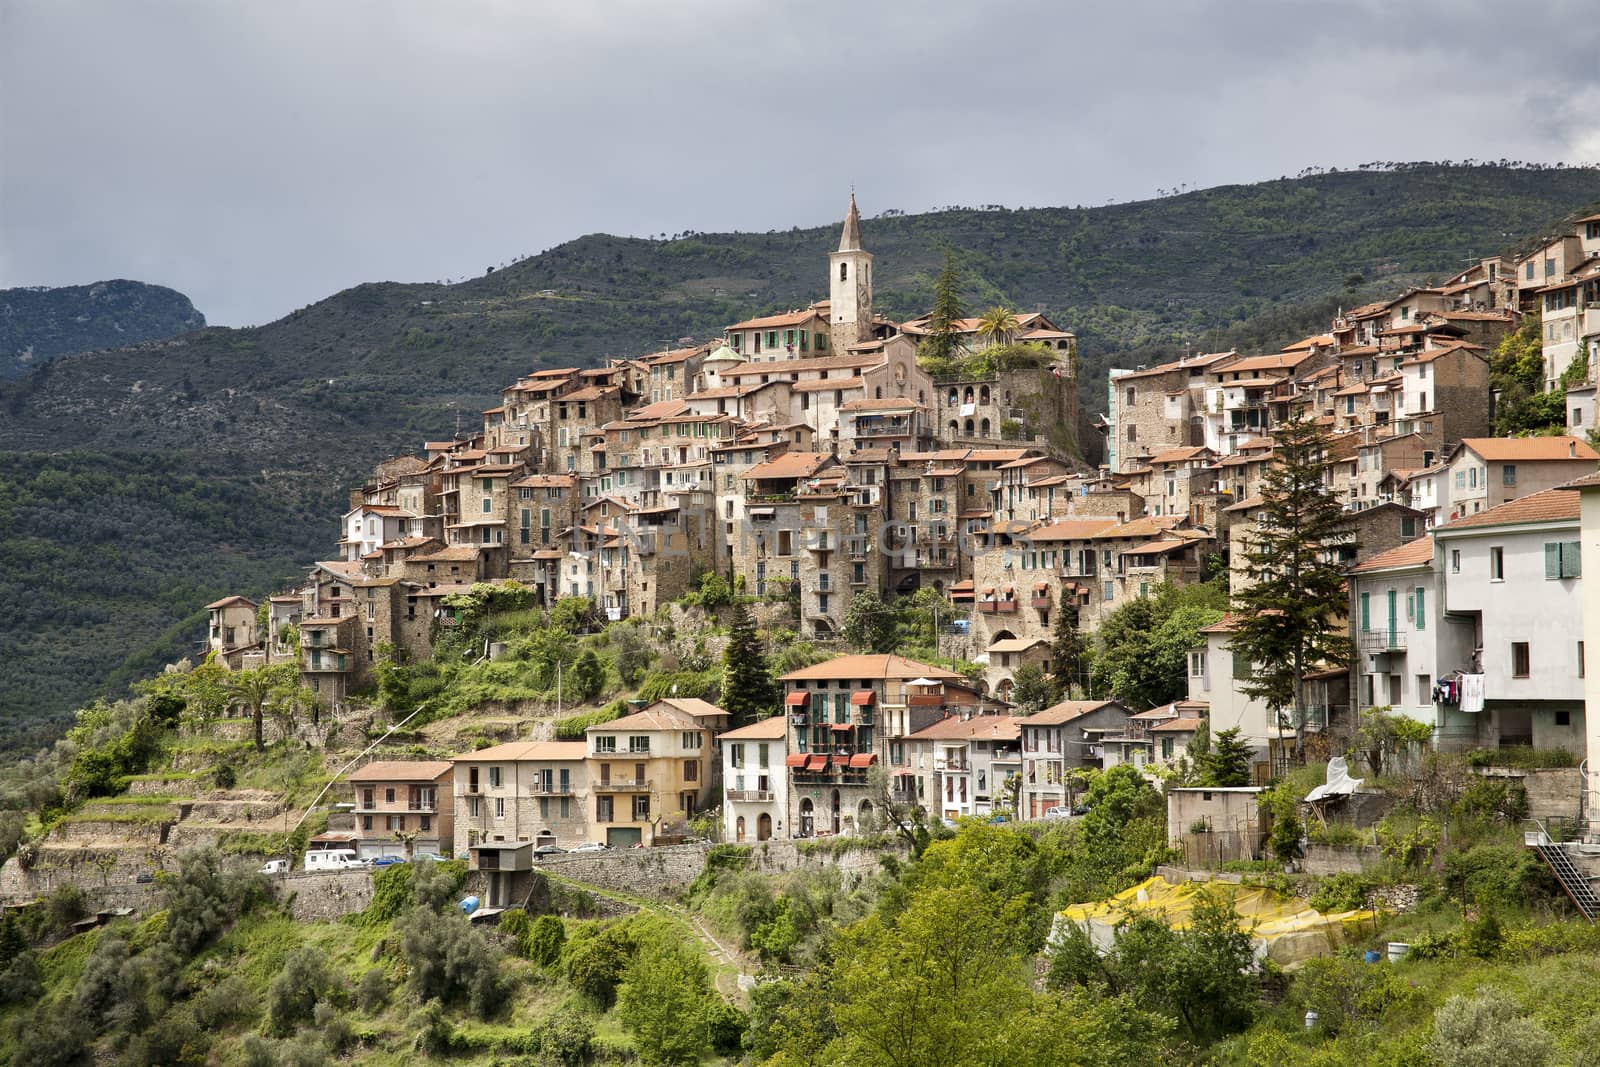 typical village of ligurian countryside, called apricale